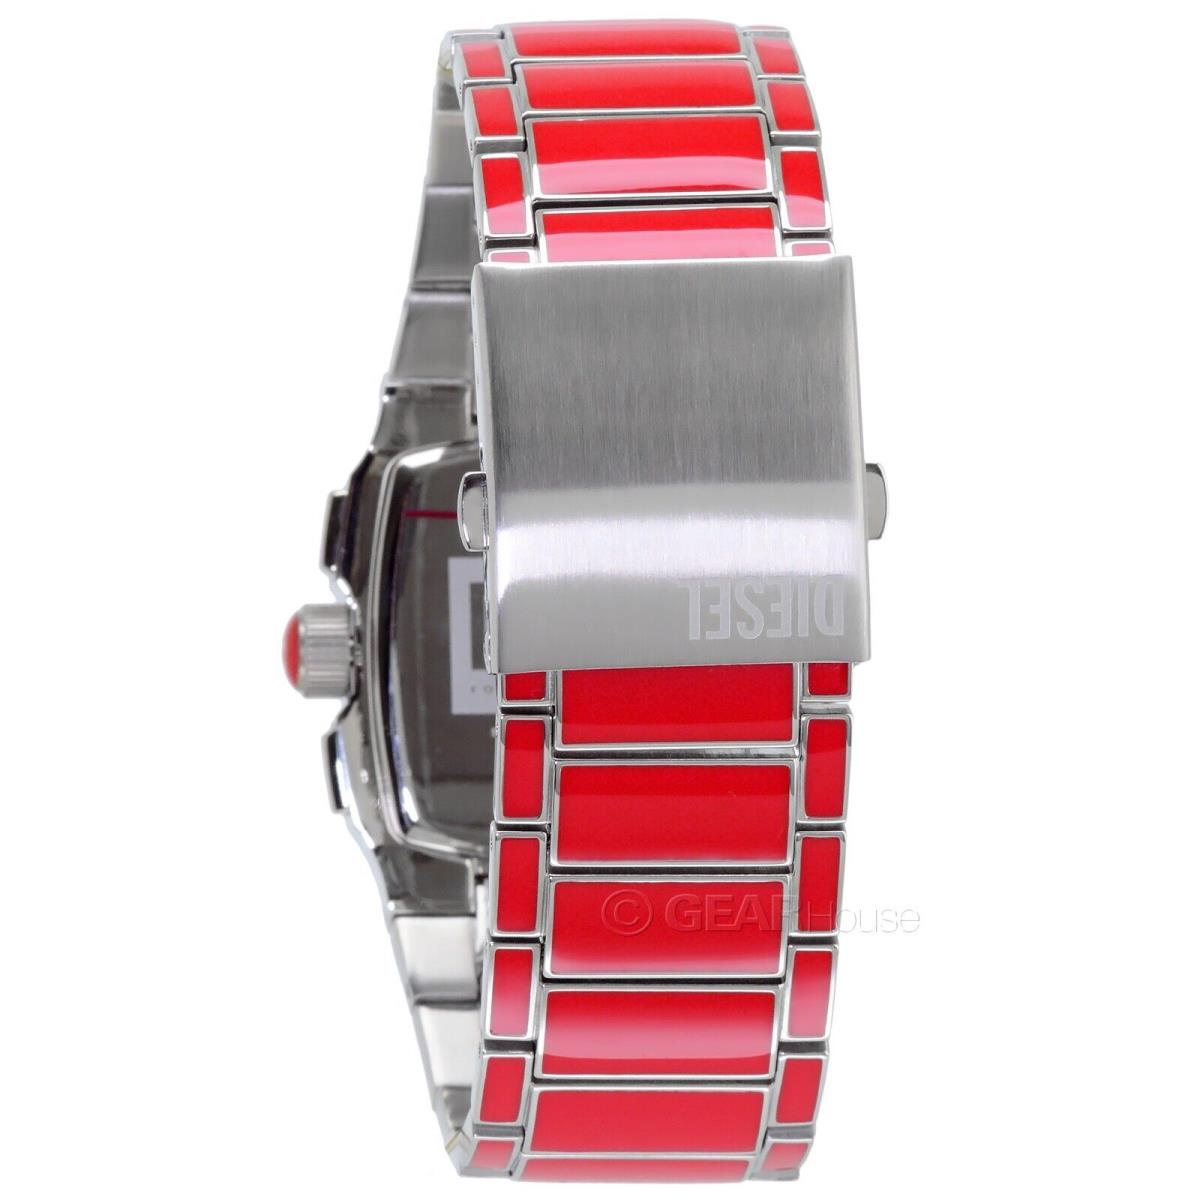 Diesel Cliffhanger Mens Chronograph Watch Glossy Red Enamel Band Silver Dial